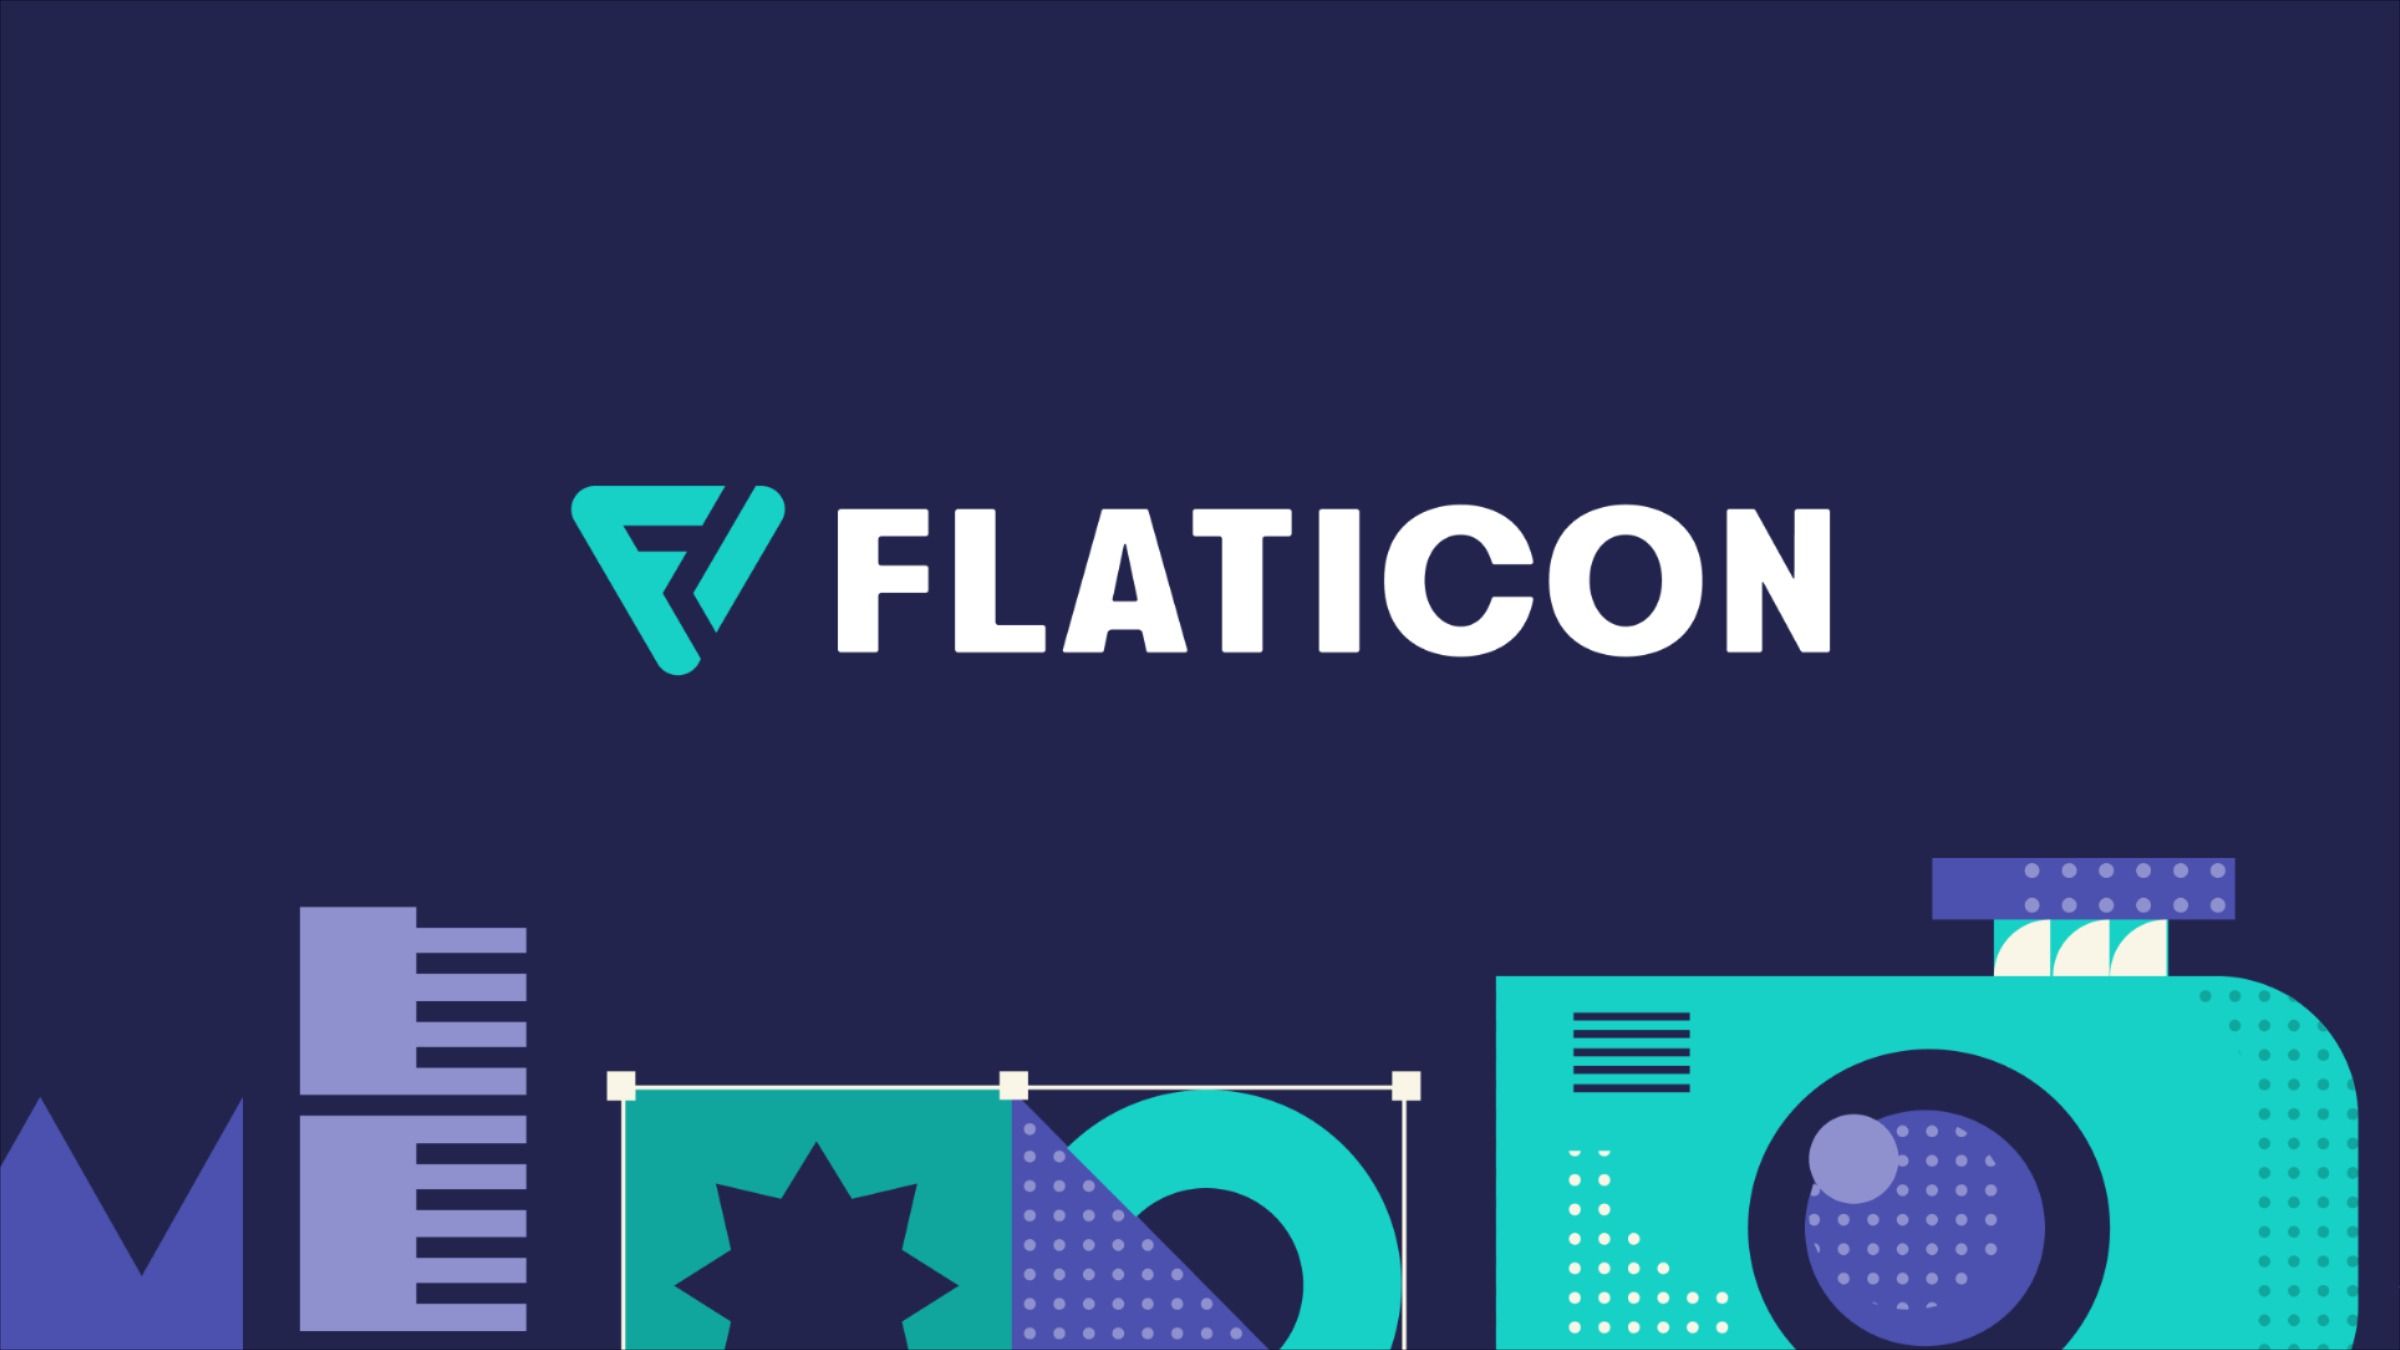 What is Flaticon